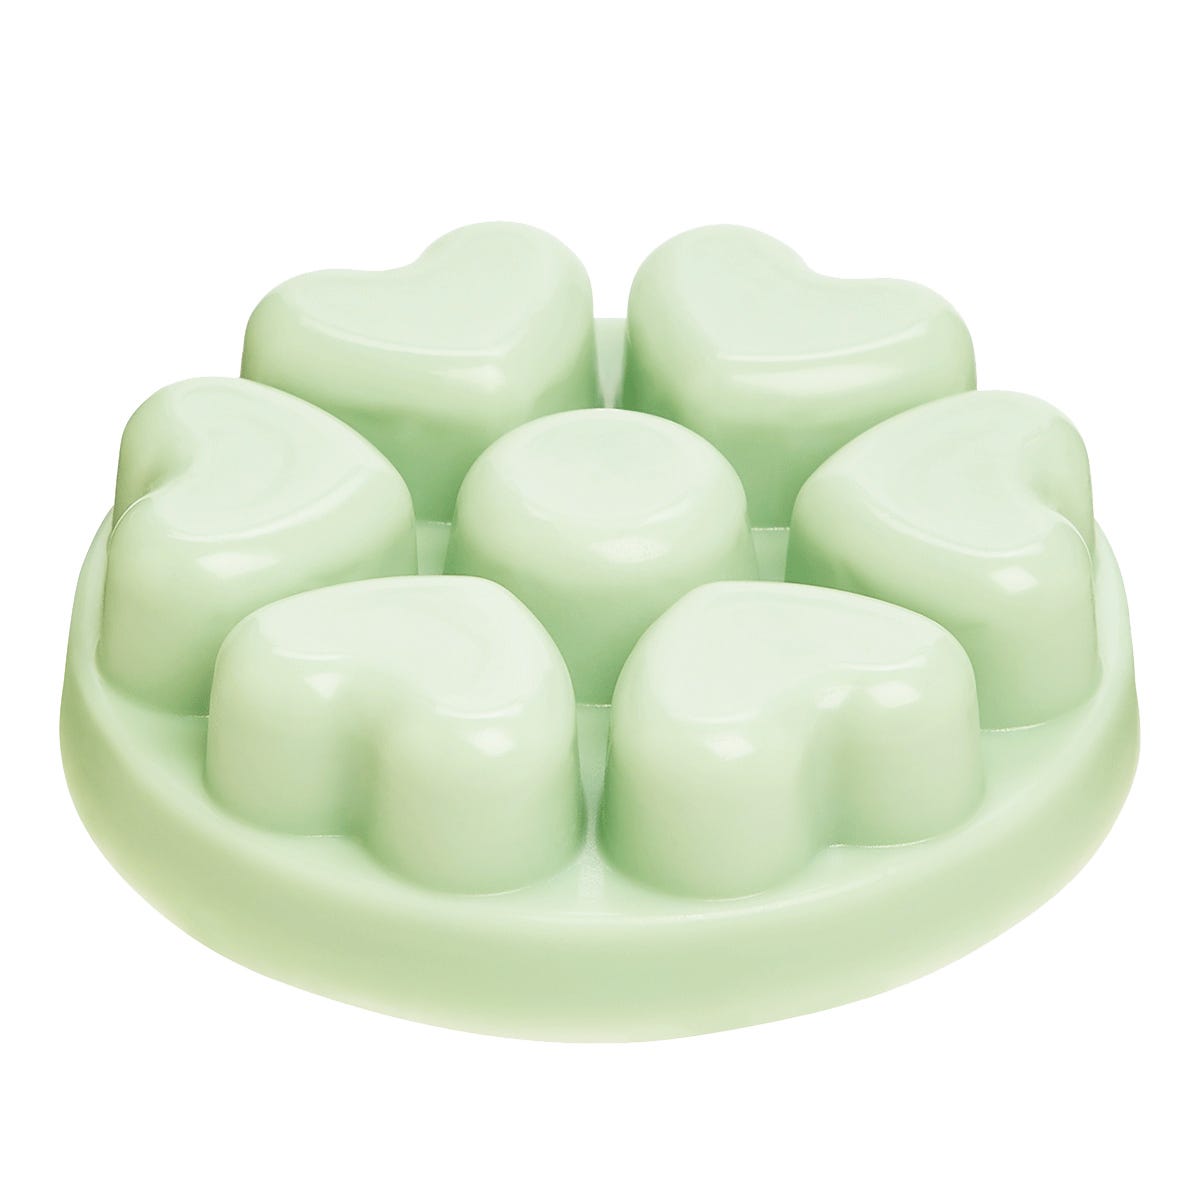 Cucumber Clementine Scent Plus® Heart-Shaped Melts - PartyLite US